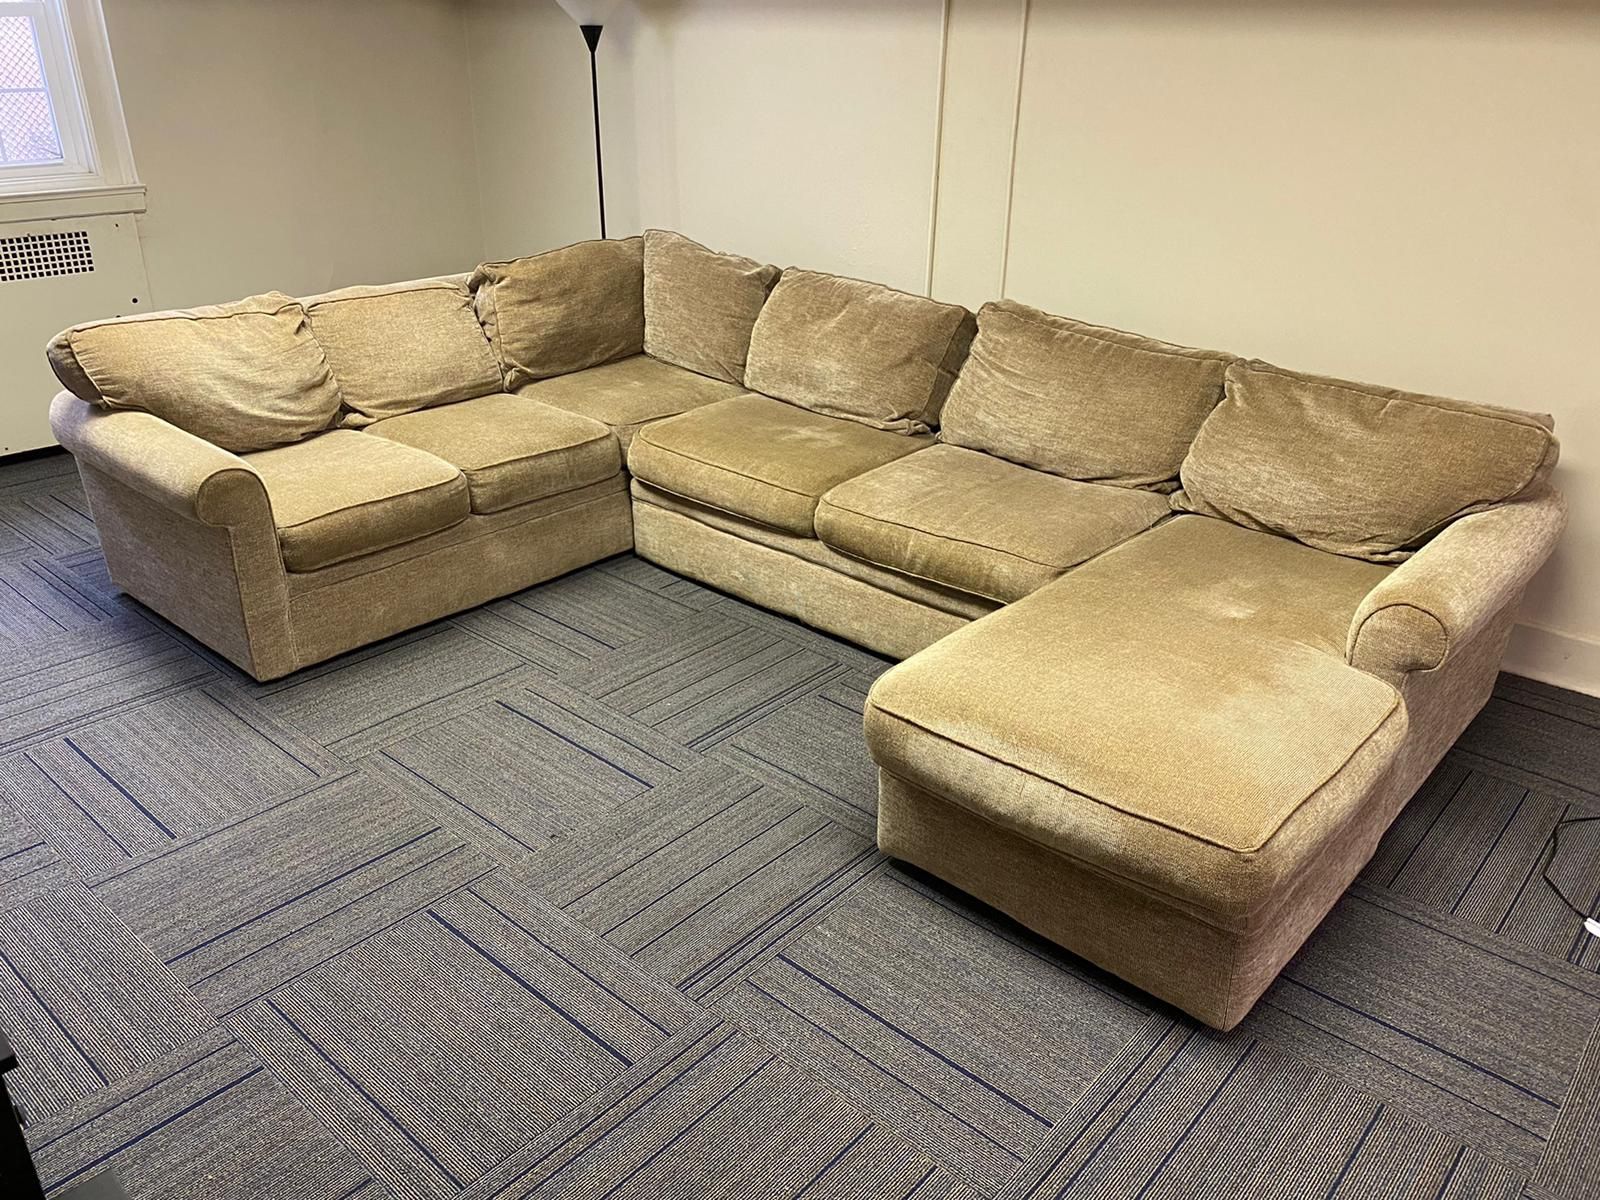 FREE DELIVERY - Comfortable Big Double Sectional Gold Couch - Look My Profile For More Options 